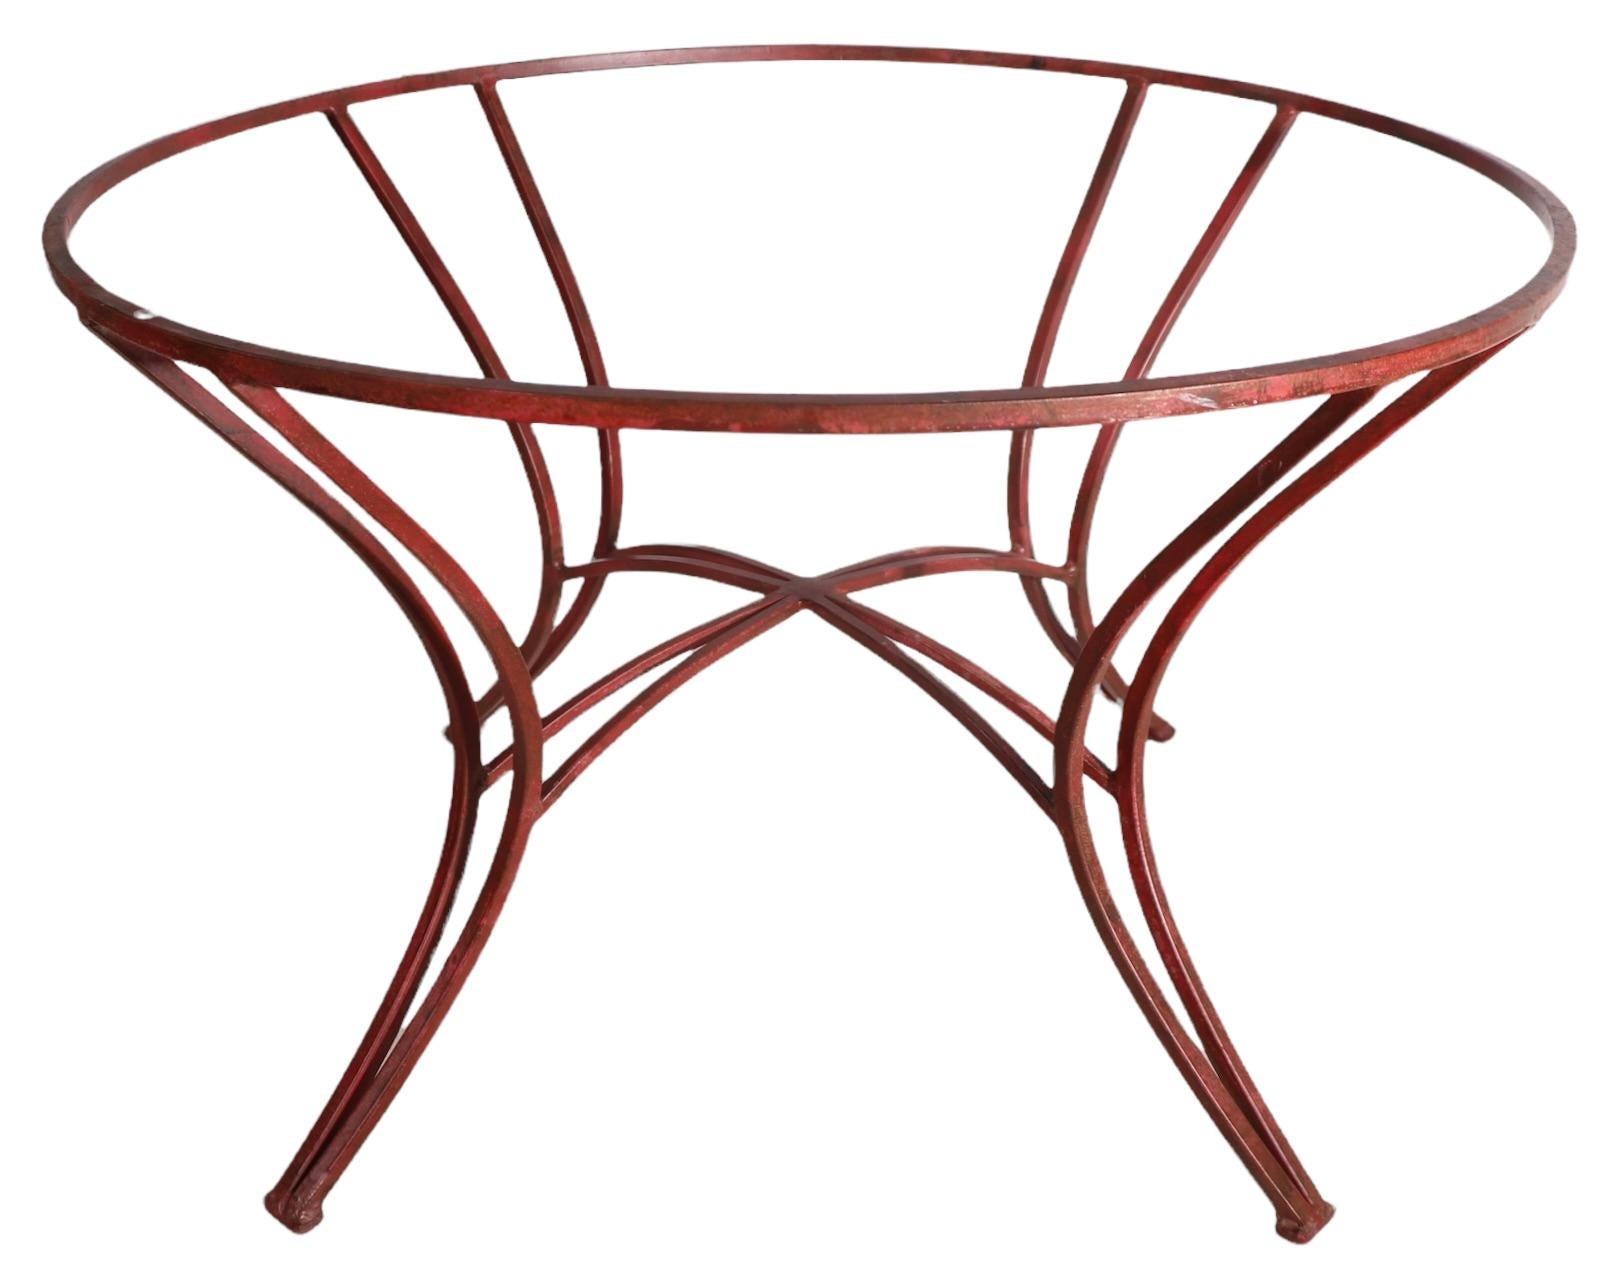 Wrought Iron and Glass Side Table Suitable for Patio, Garden or Poolside Use In Good Condition For Sale In New York, NY